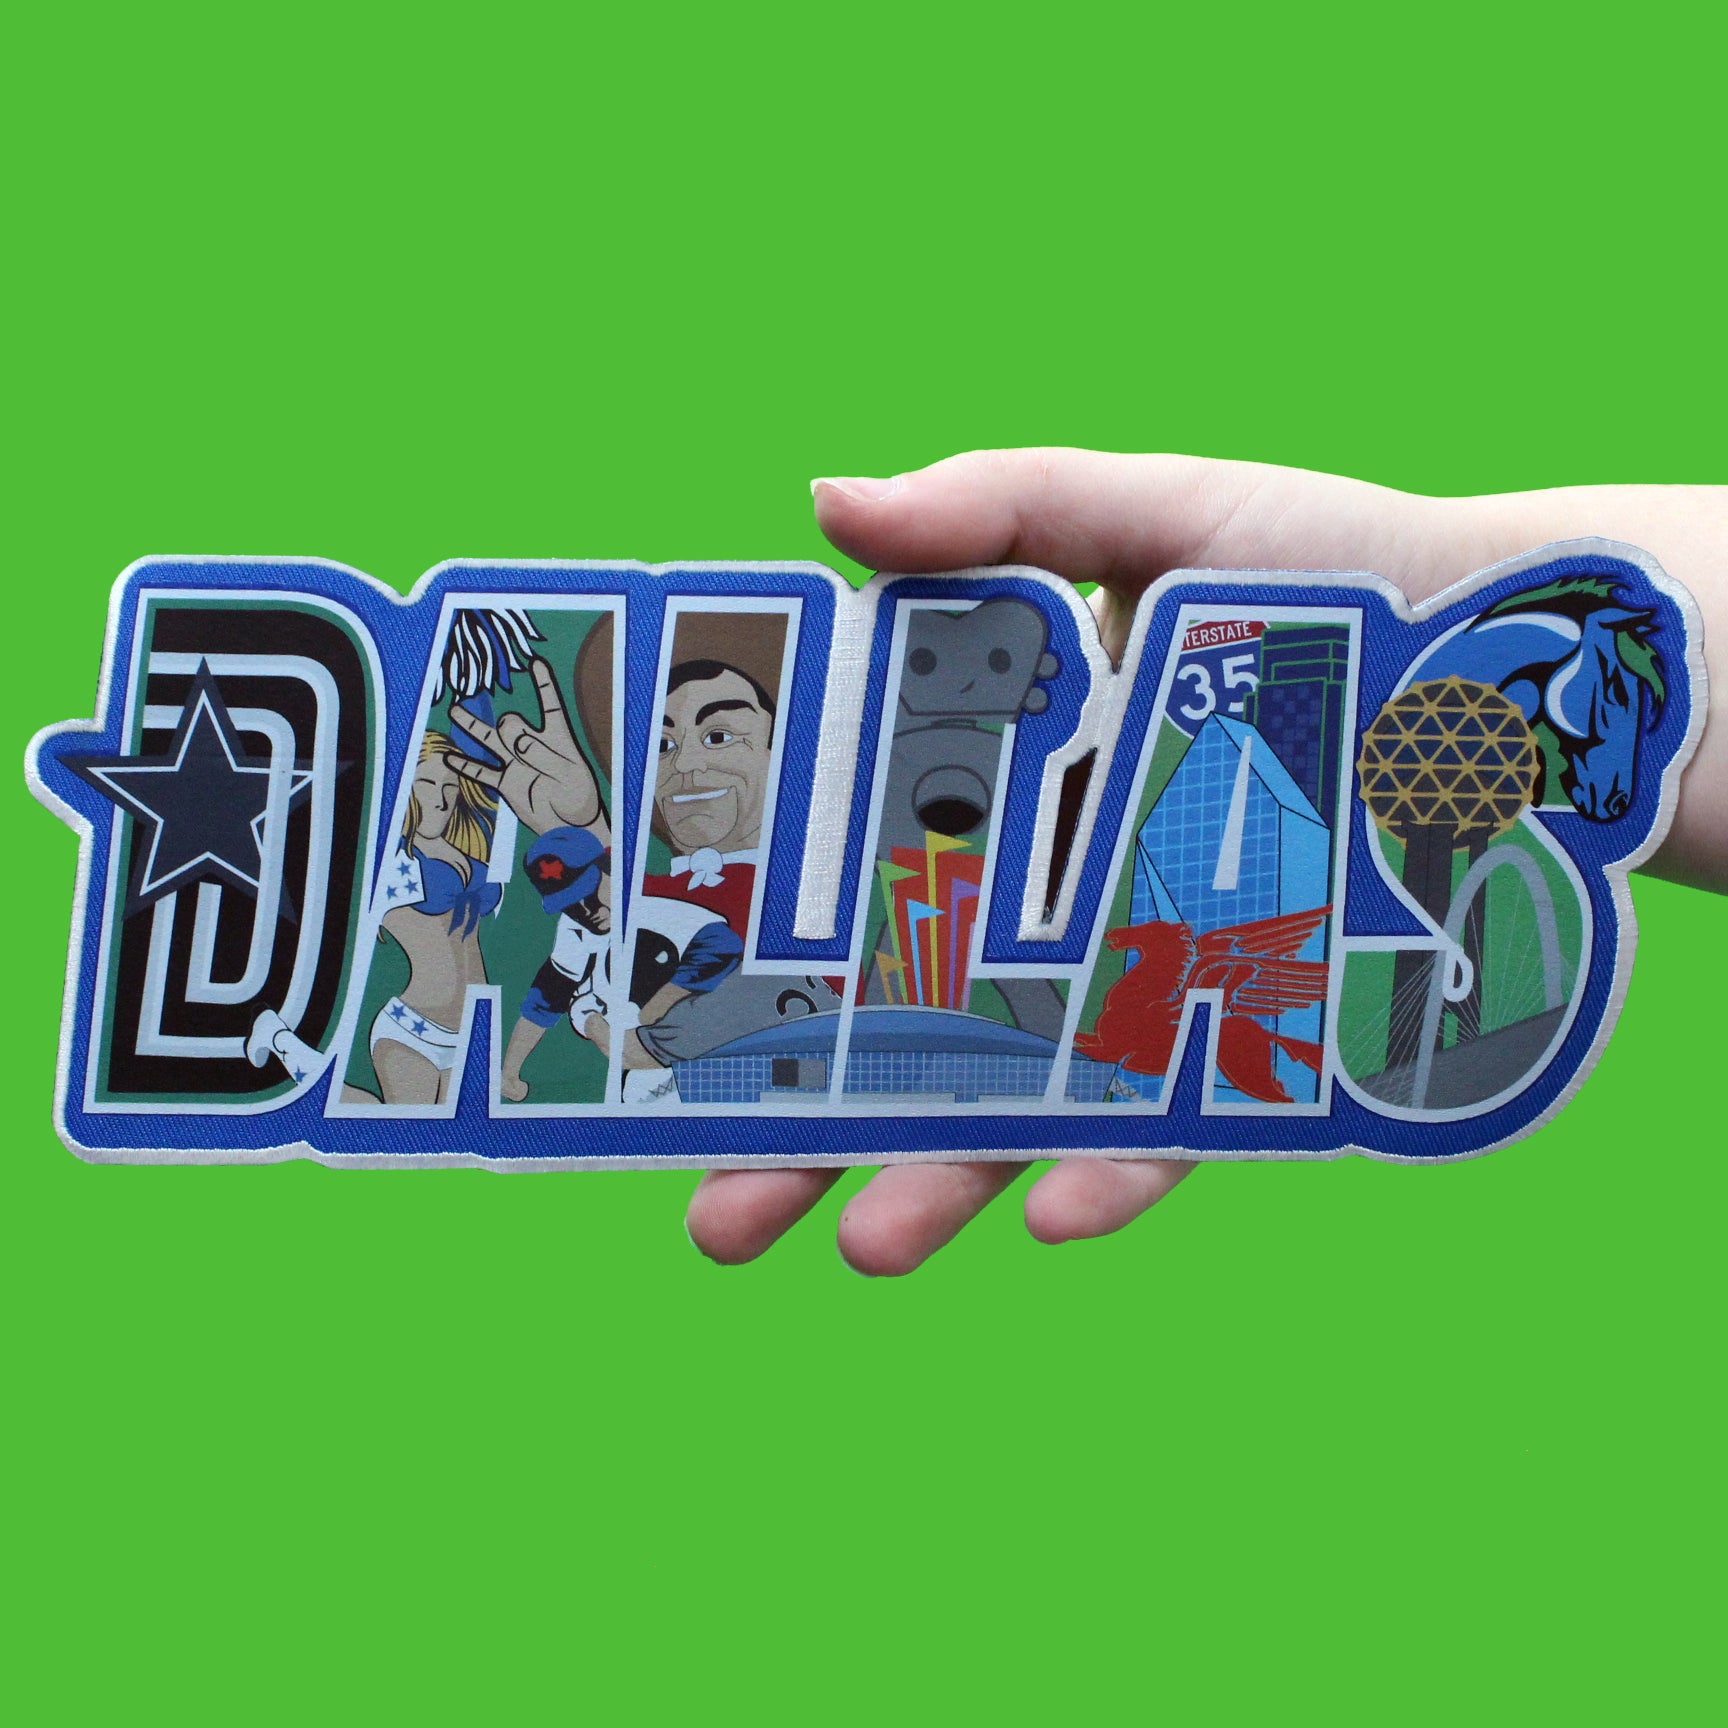 Dallas Texas Large Iconic Screen Print Collage Iron On Embroidered Patch 